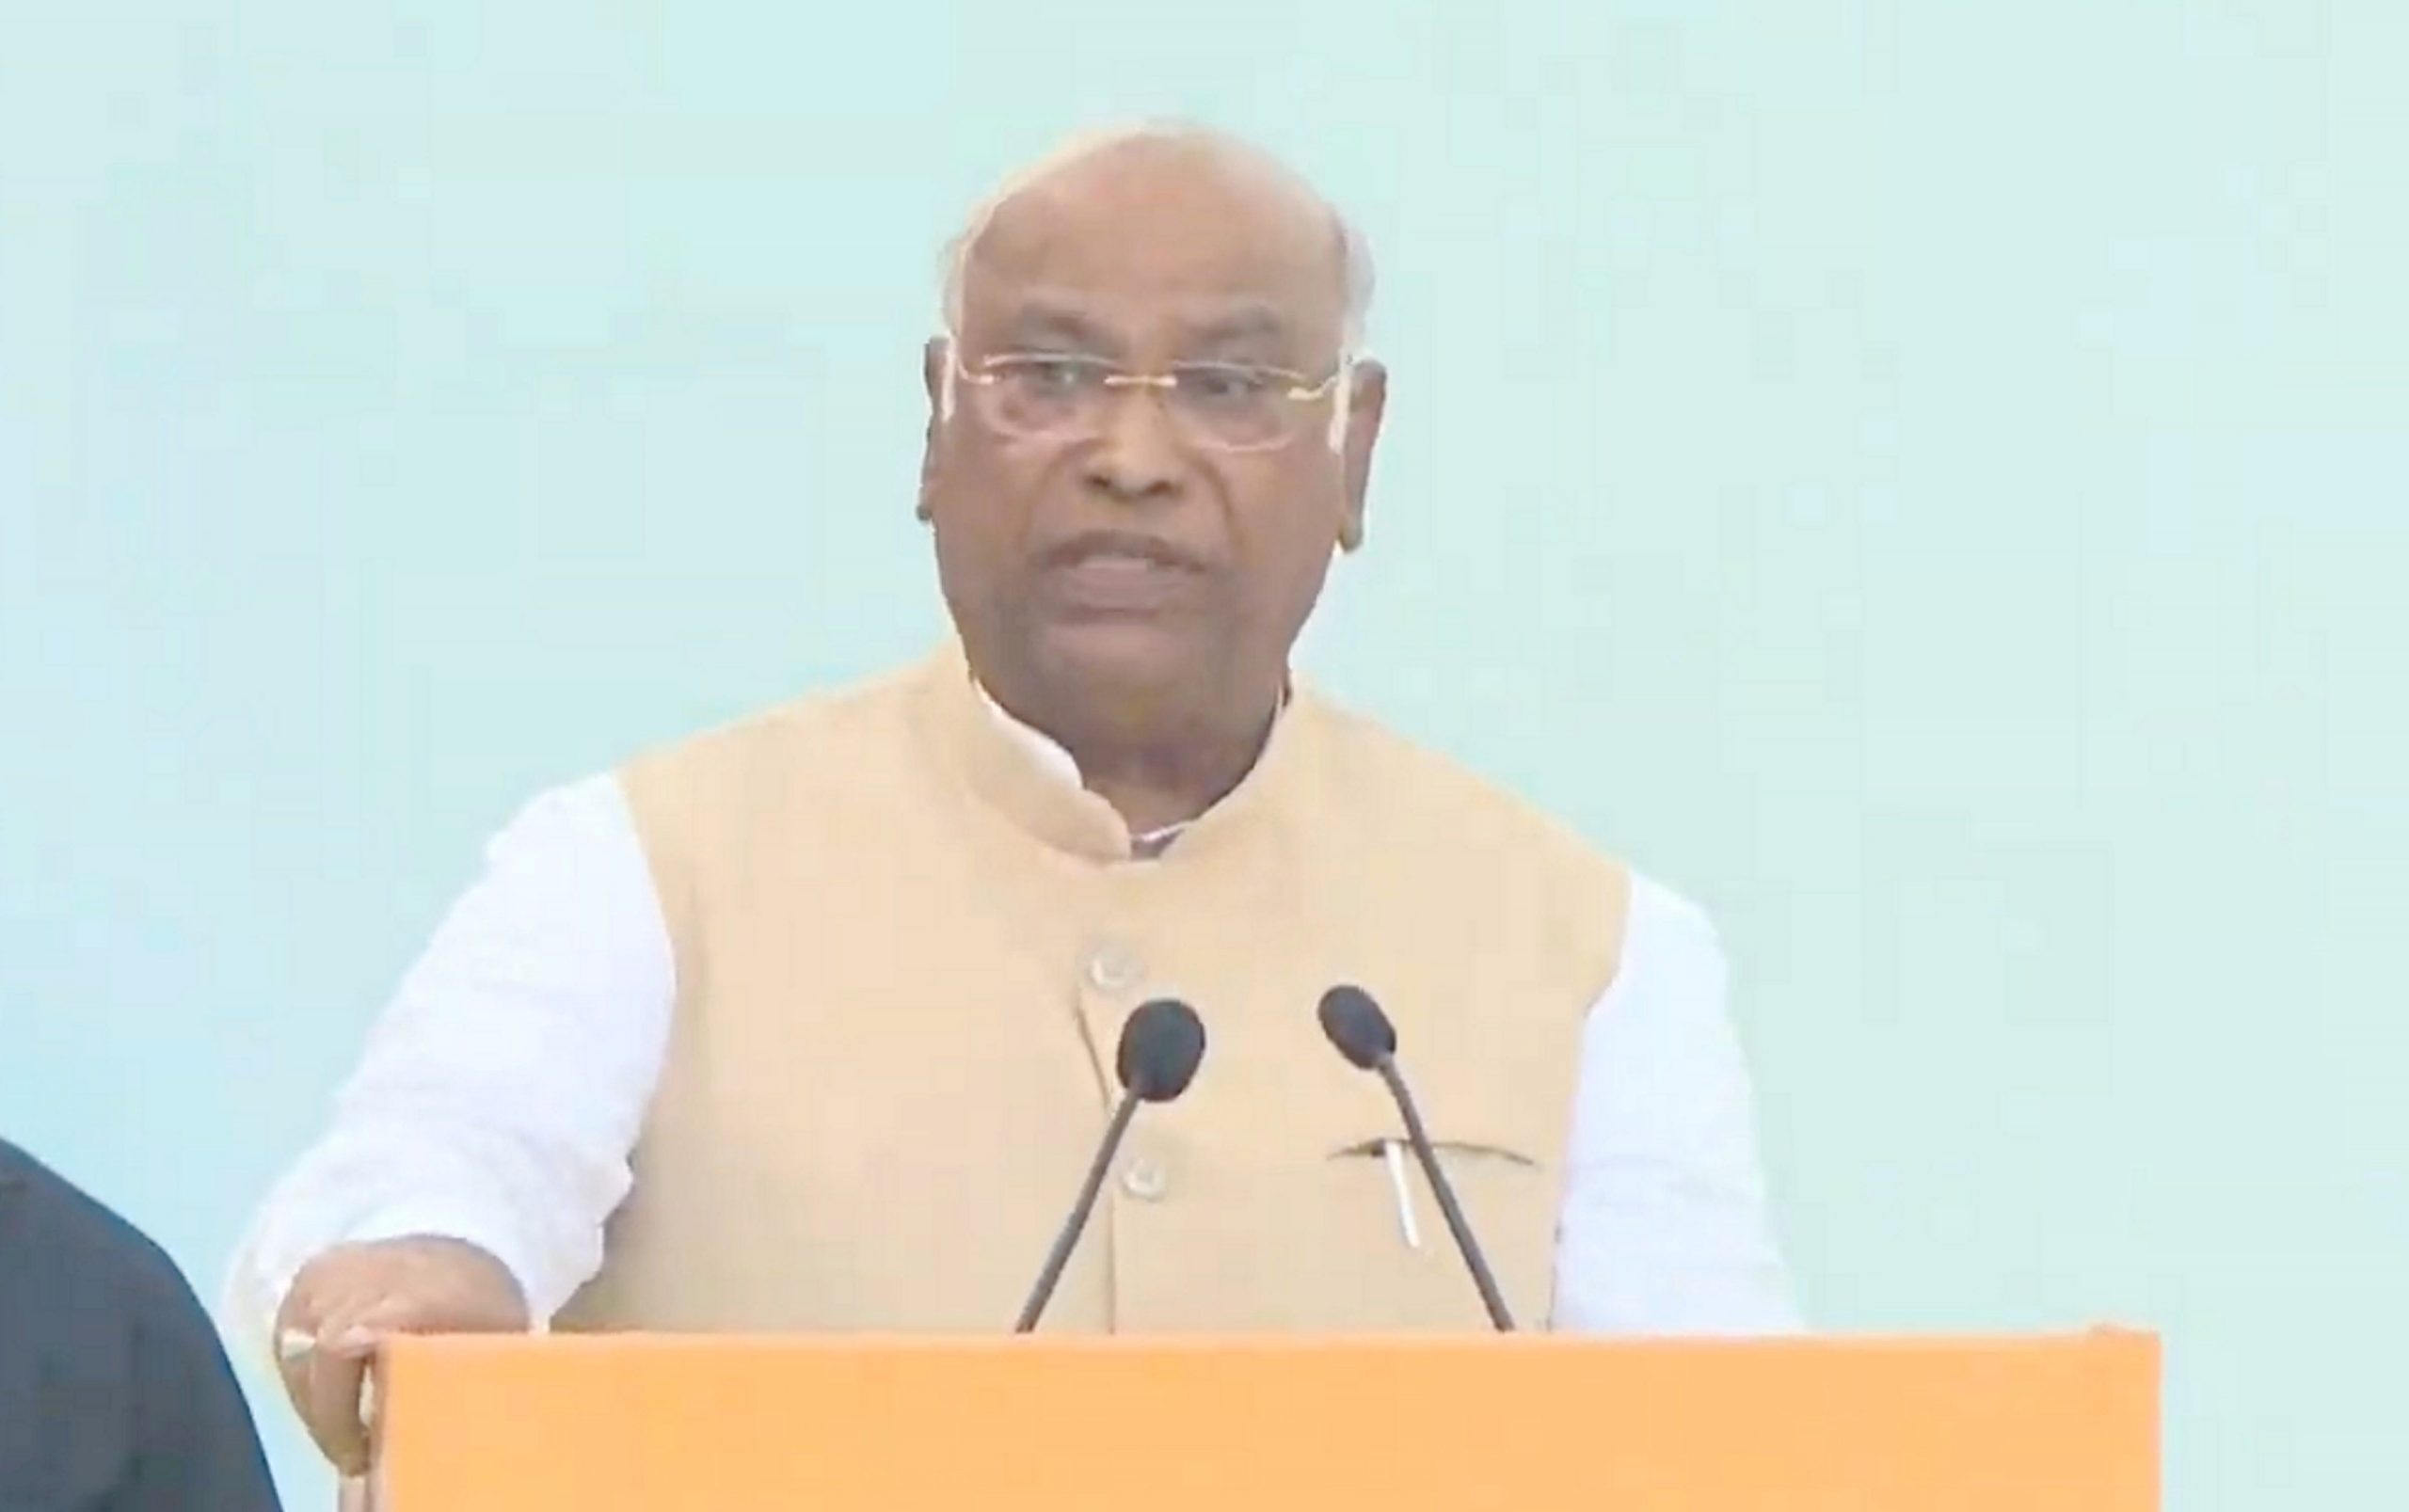 Congress will break system of lies and hatred, says Mallikarjun Kharge after formal takeover